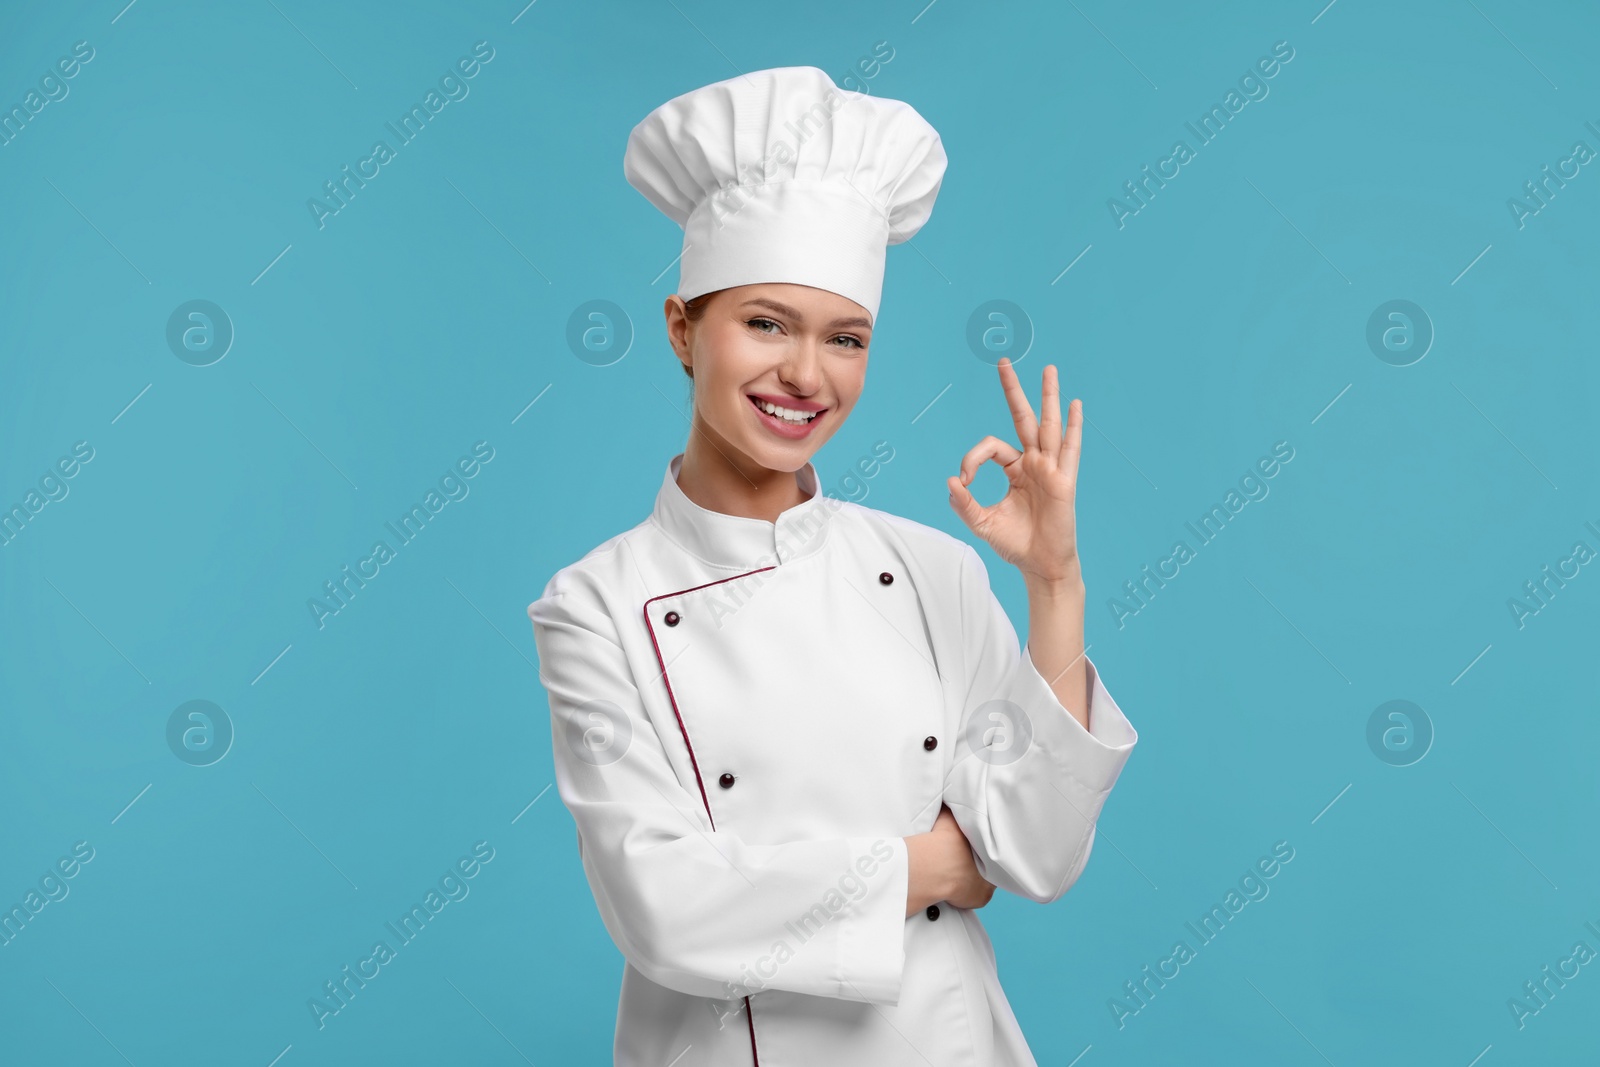 Photo of Happy woman chef in uniform showing OK gesture on light blue background